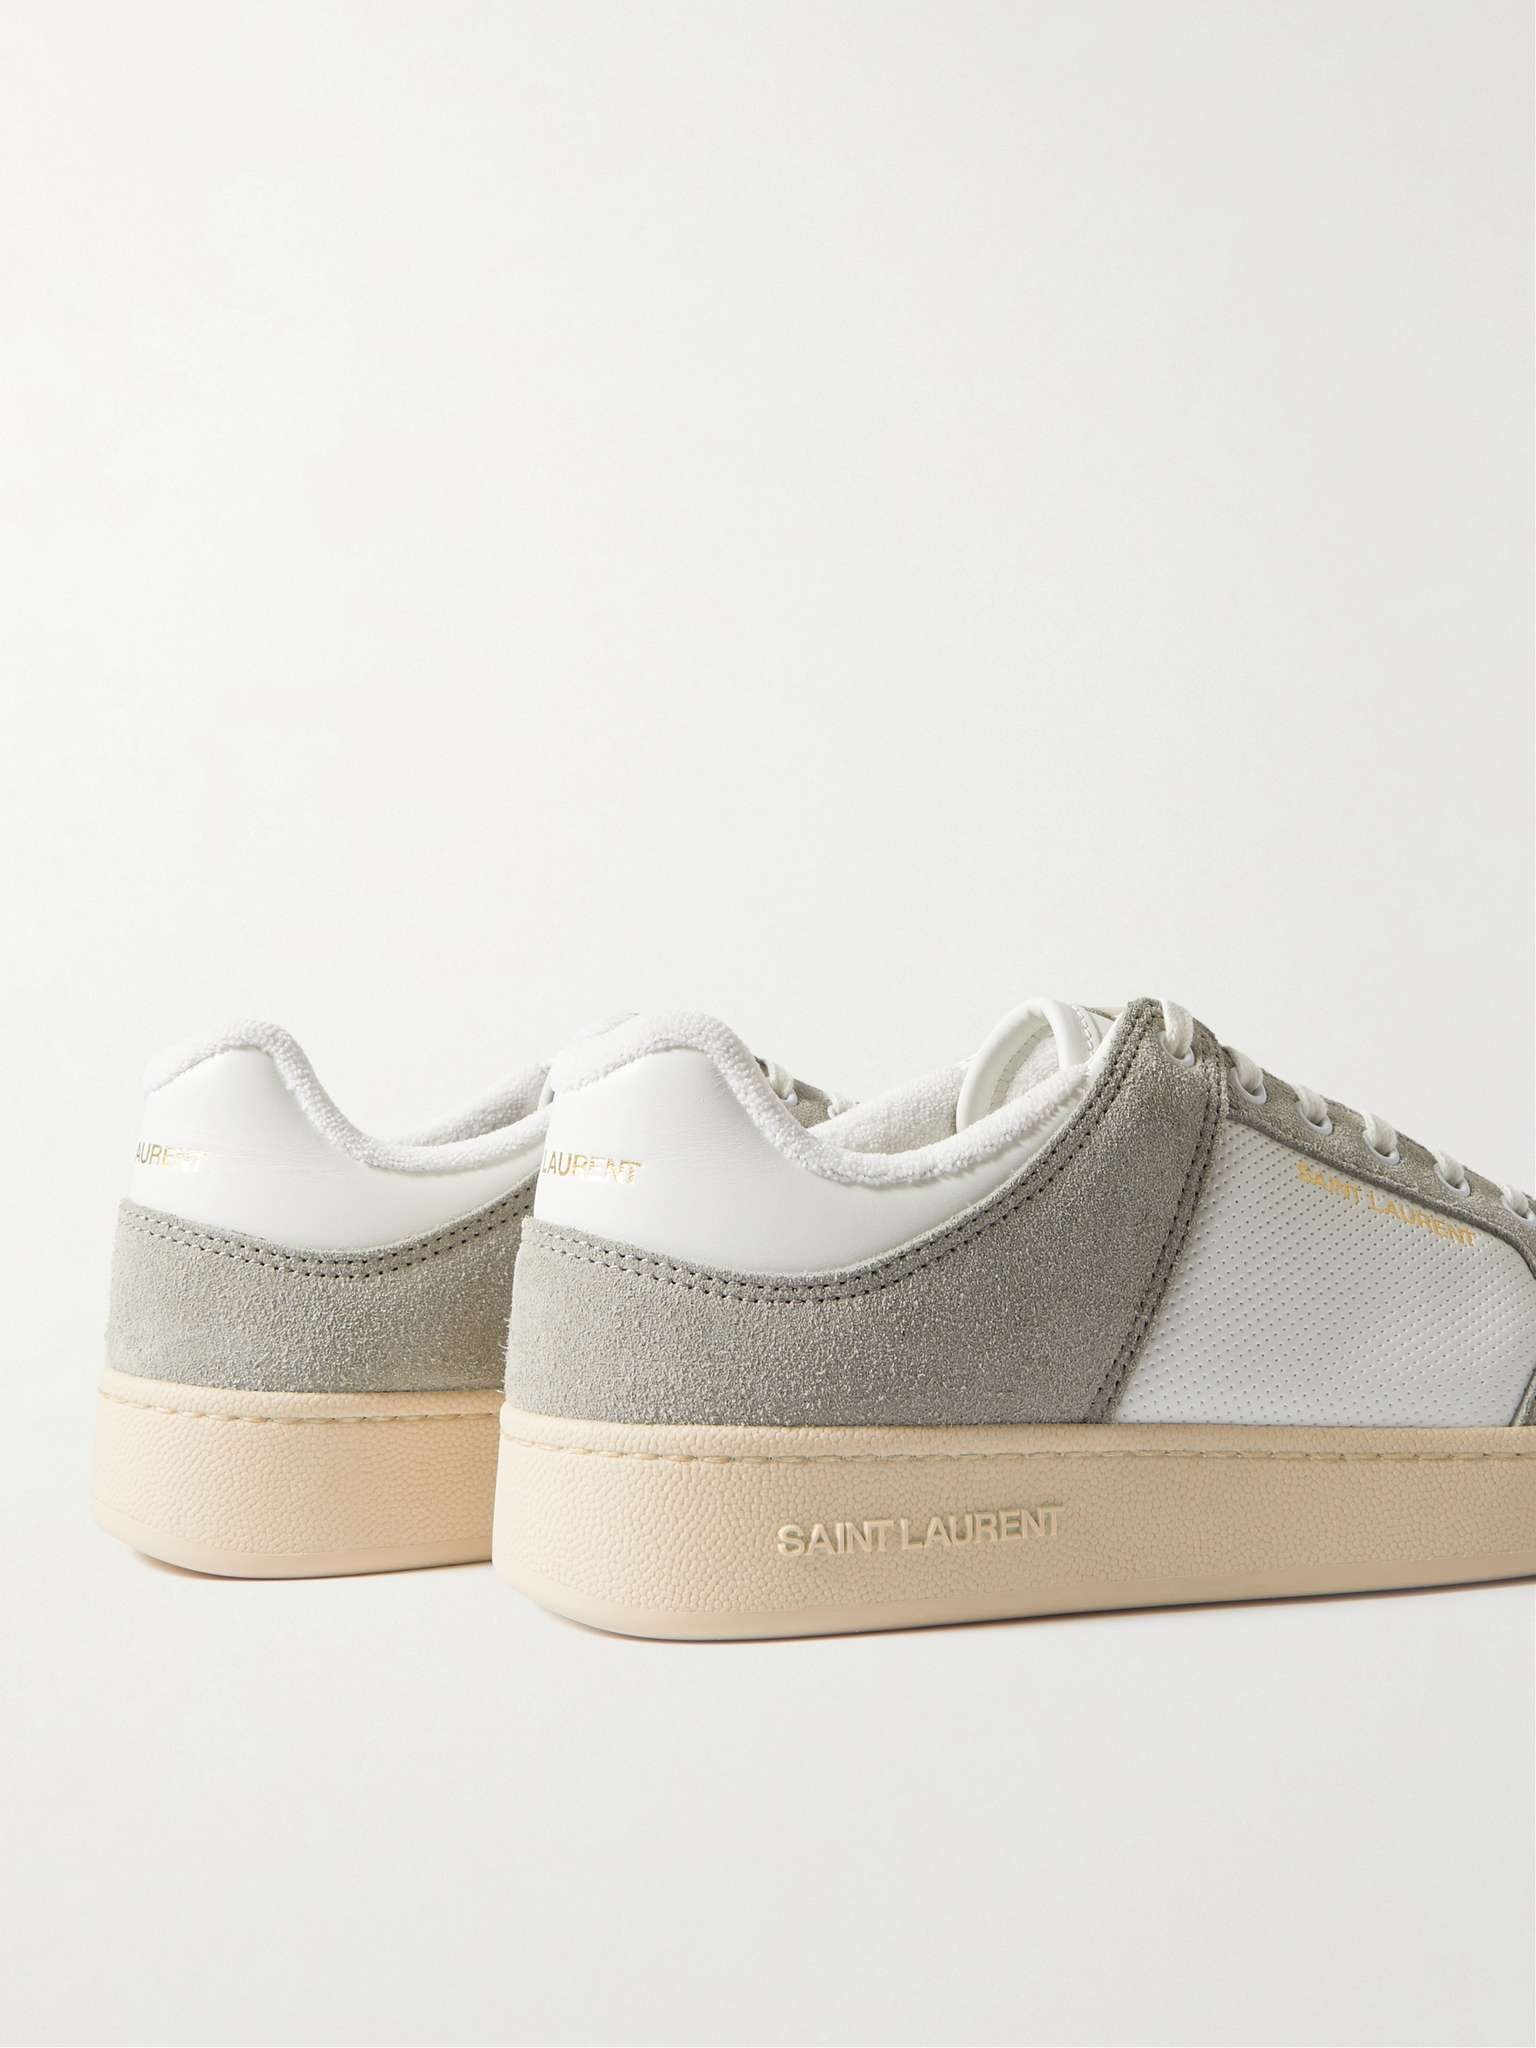 SL/61 Perforated Leather and Suede Sneakers - 5